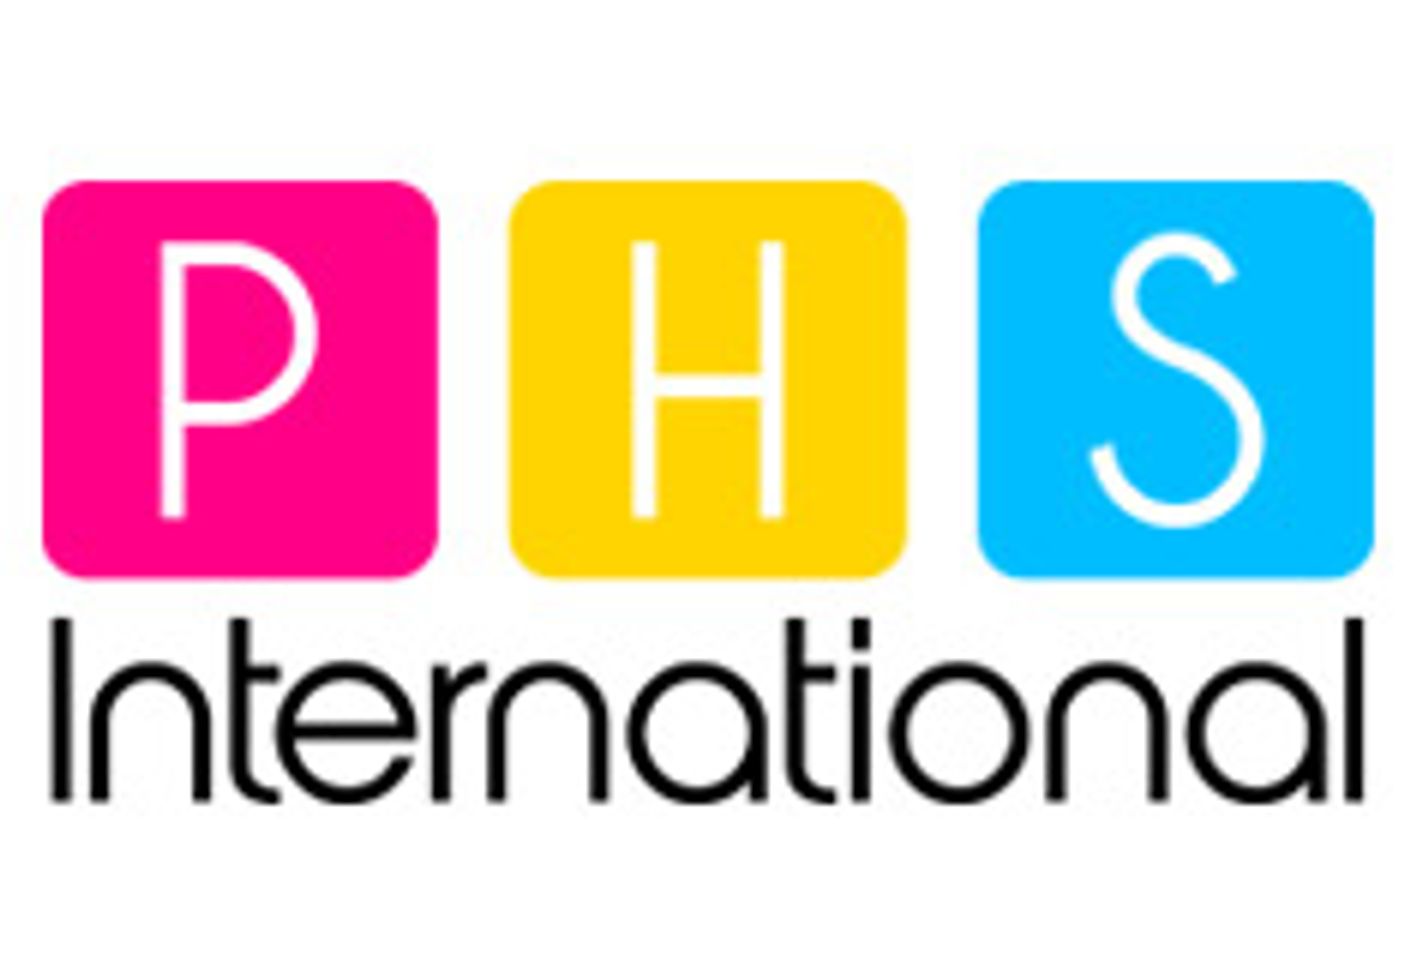 PHS International’s M2M Collection Nominated for 2013 AVN Award